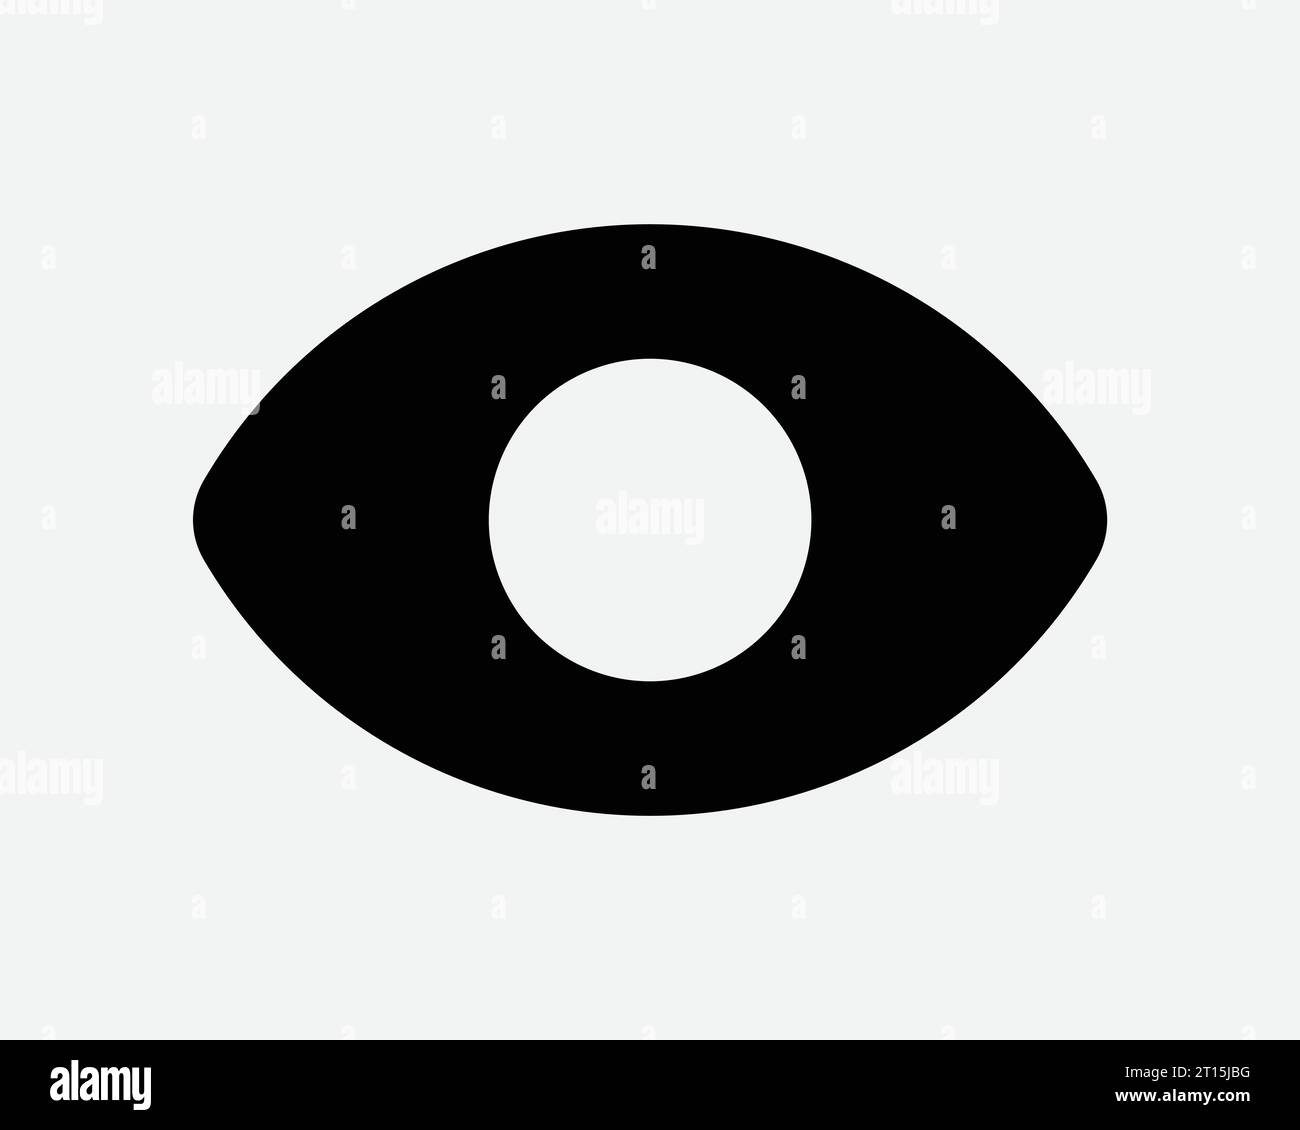 Eyes Icon See Sight Vision Eyeball View CCTV Spy Target Lens Watch Watching Optical Eyesight Black White Shape Line Outline Sign Symbol EPS Vector Stock Vector